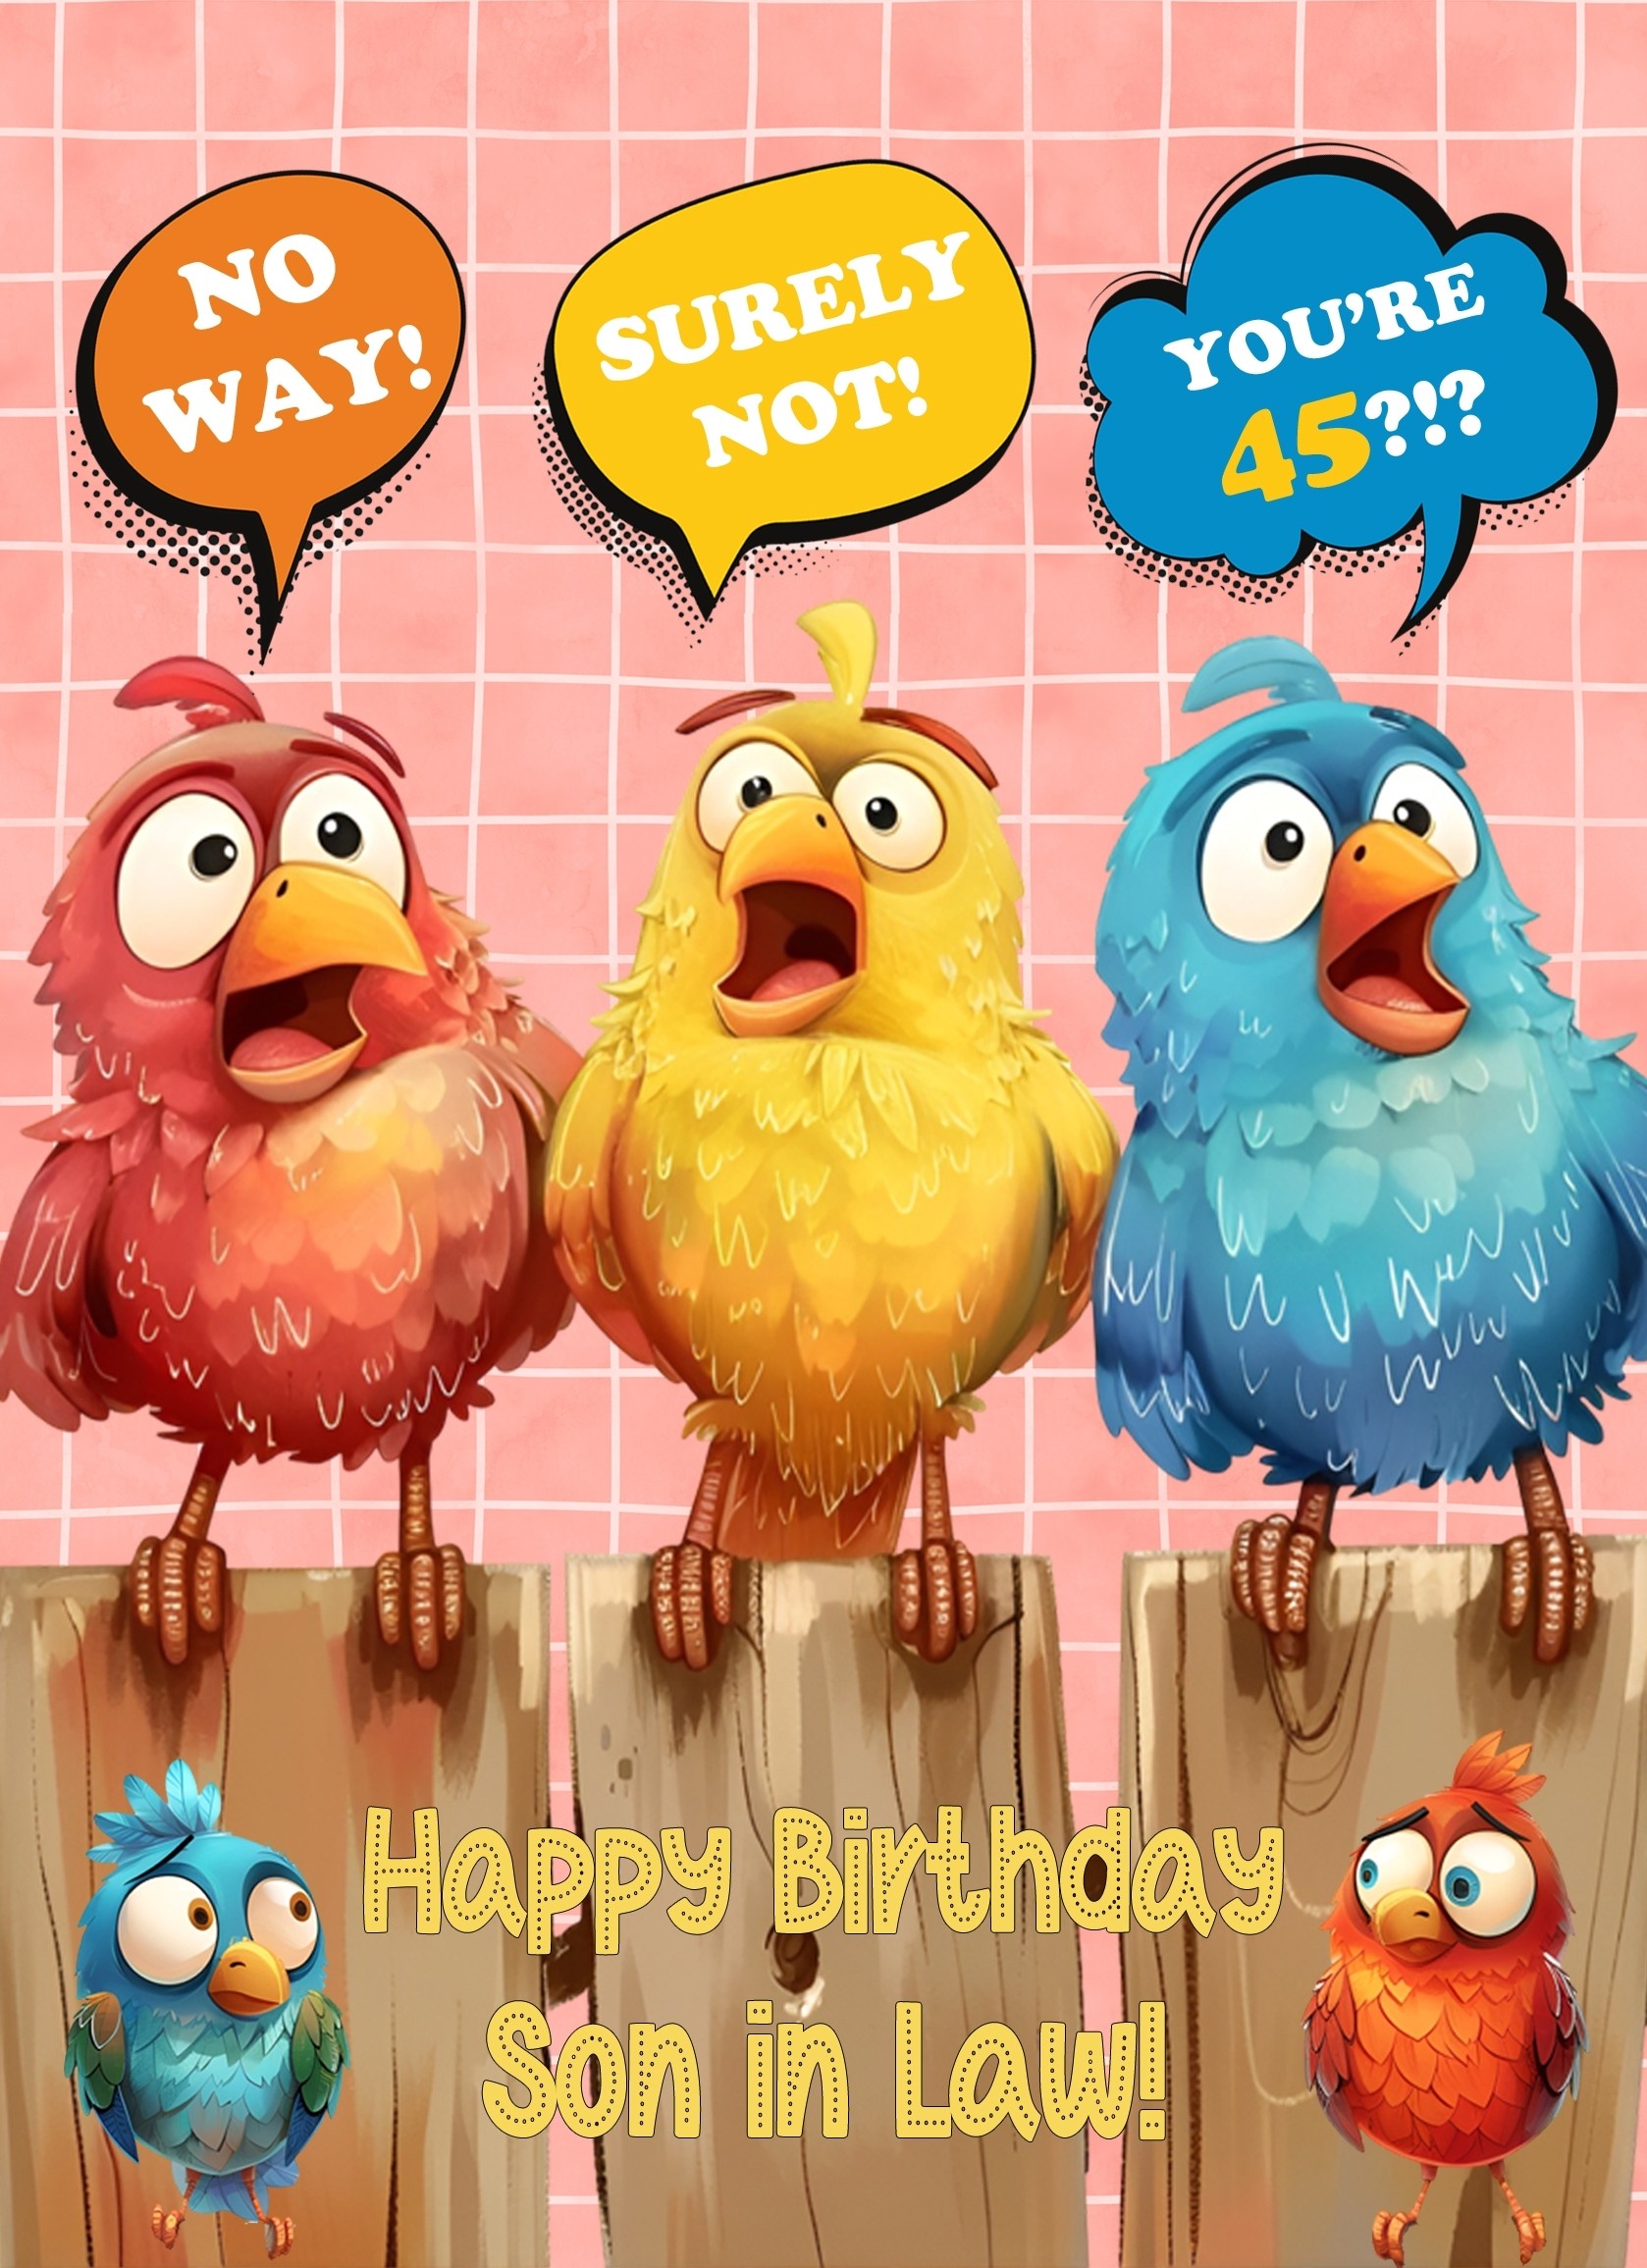 Son in Law 45th Birthday Card (Funny Birds Surprised)